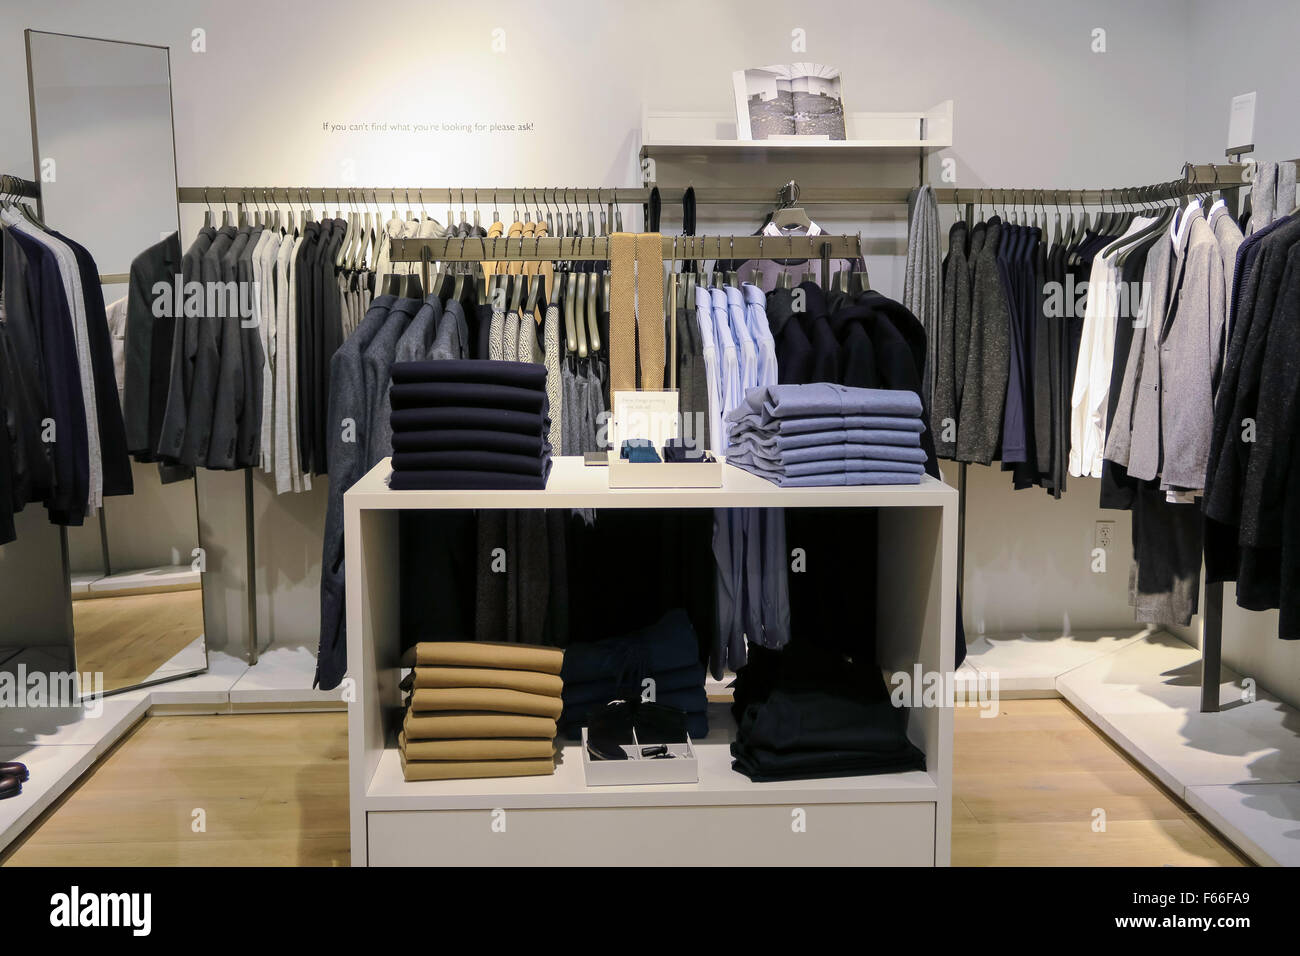 Cos Store Interior on Fifth Avenue, NYC Stock Photo - Alamy